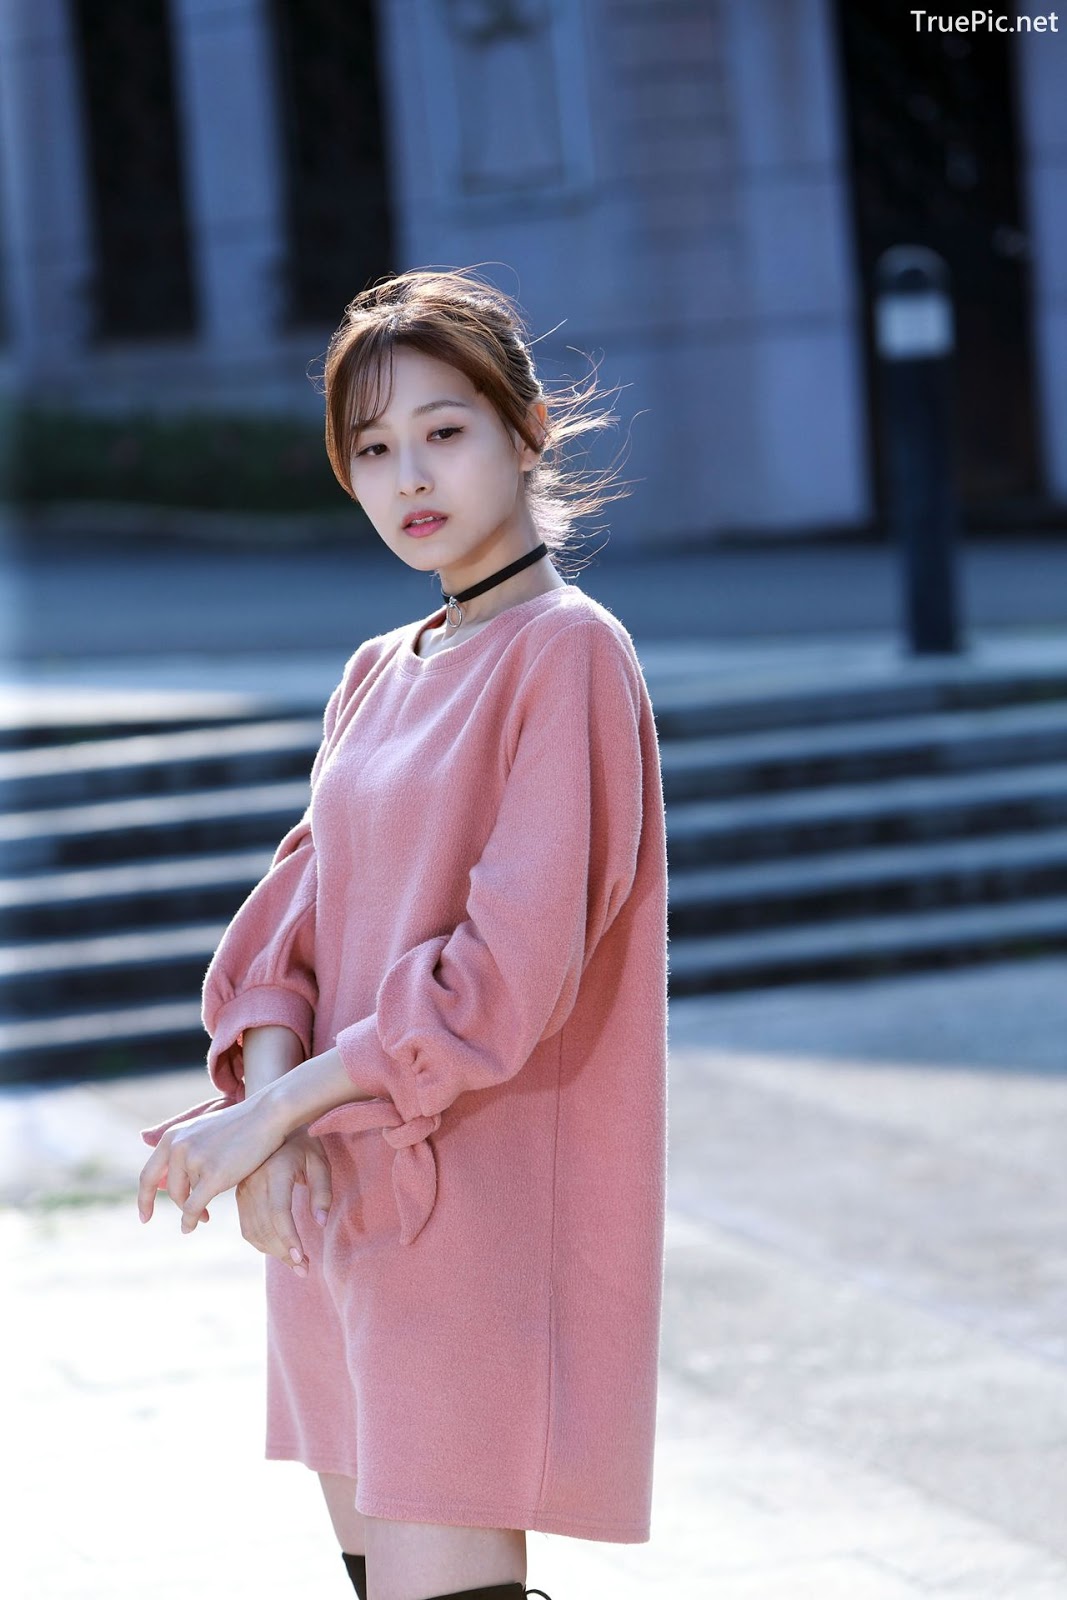 Image-Taiwanese-Model-郭思敏-Pure-And-Gorgeous-Girl-In-Pink-Sweater-Dress-TruePic.net- Picture-49